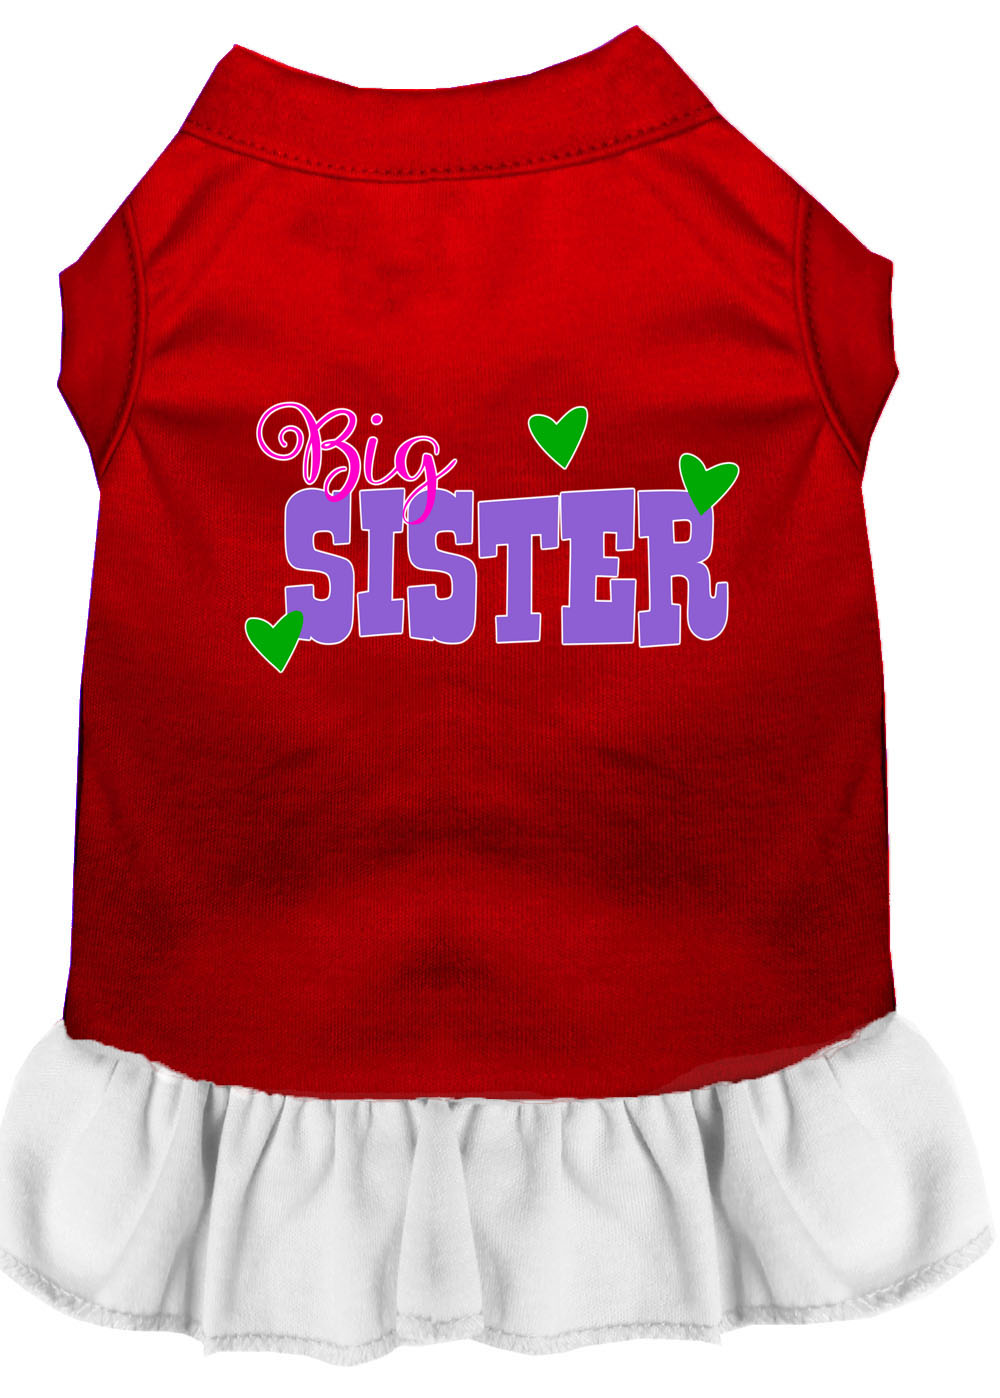 Big Sister Screen Print Dog Dress Red with White Lg